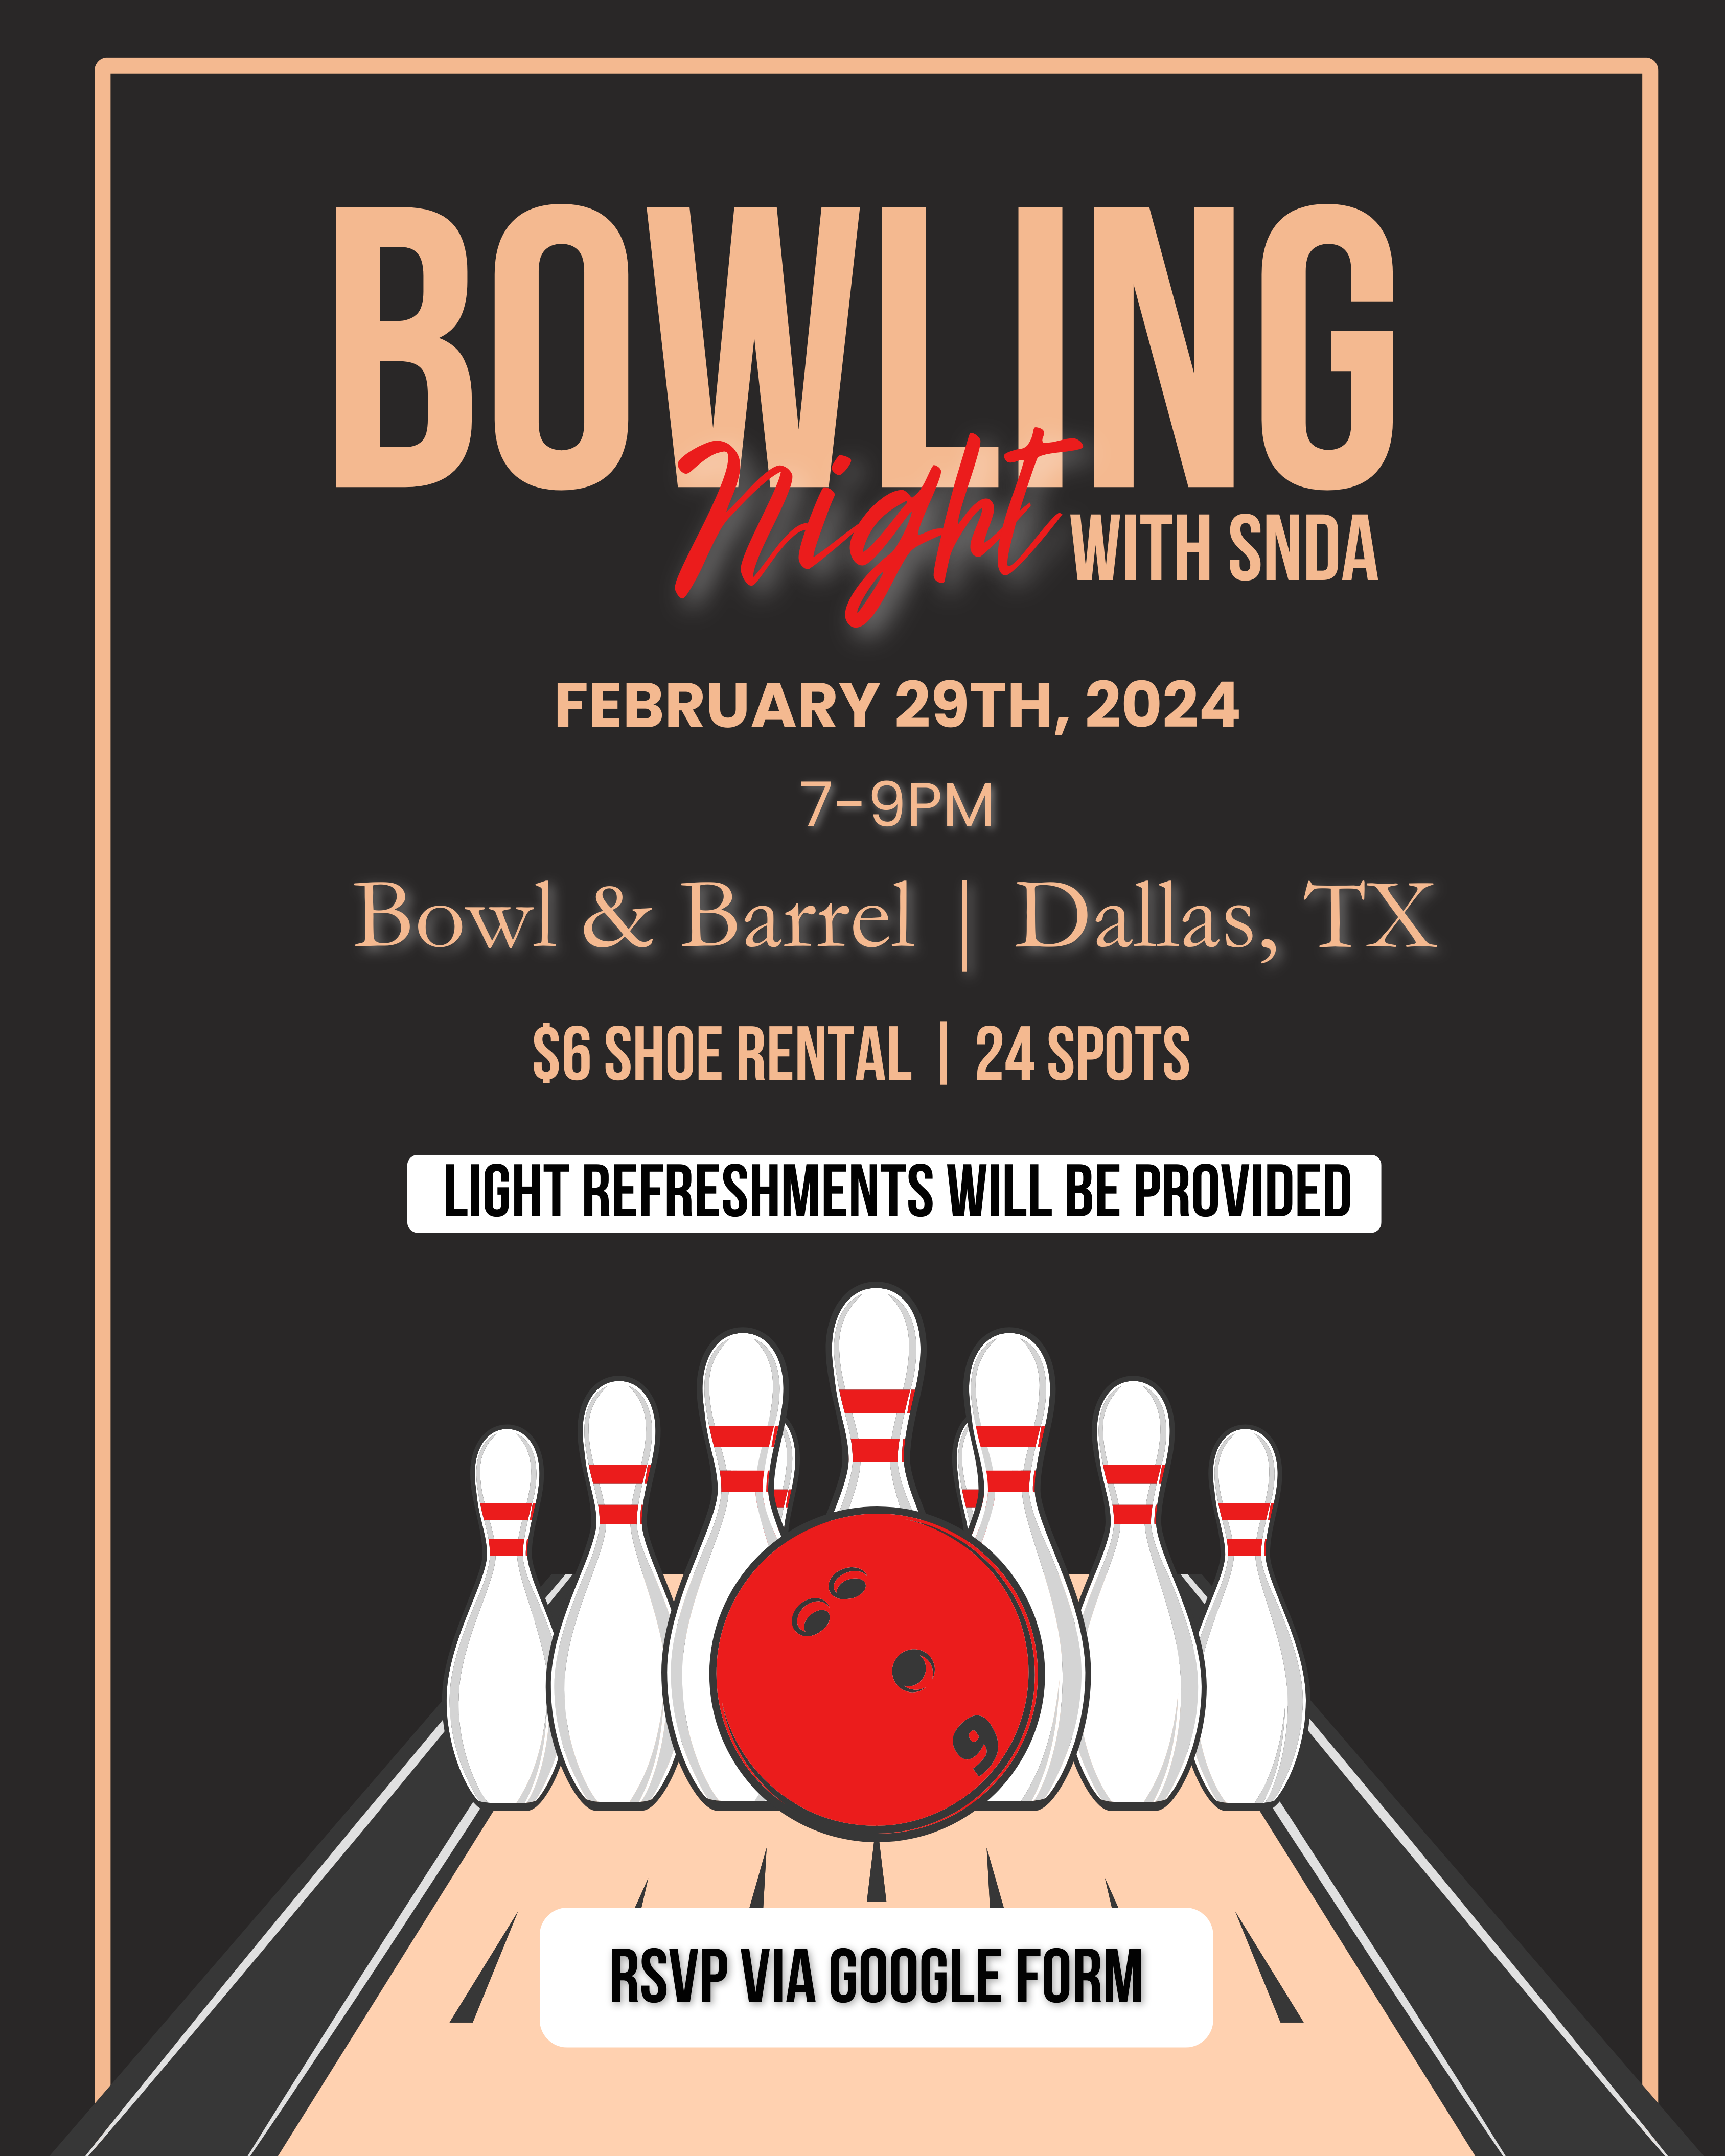 End of Month Celebration - Bowling Night with SNDA: Shoe Rental